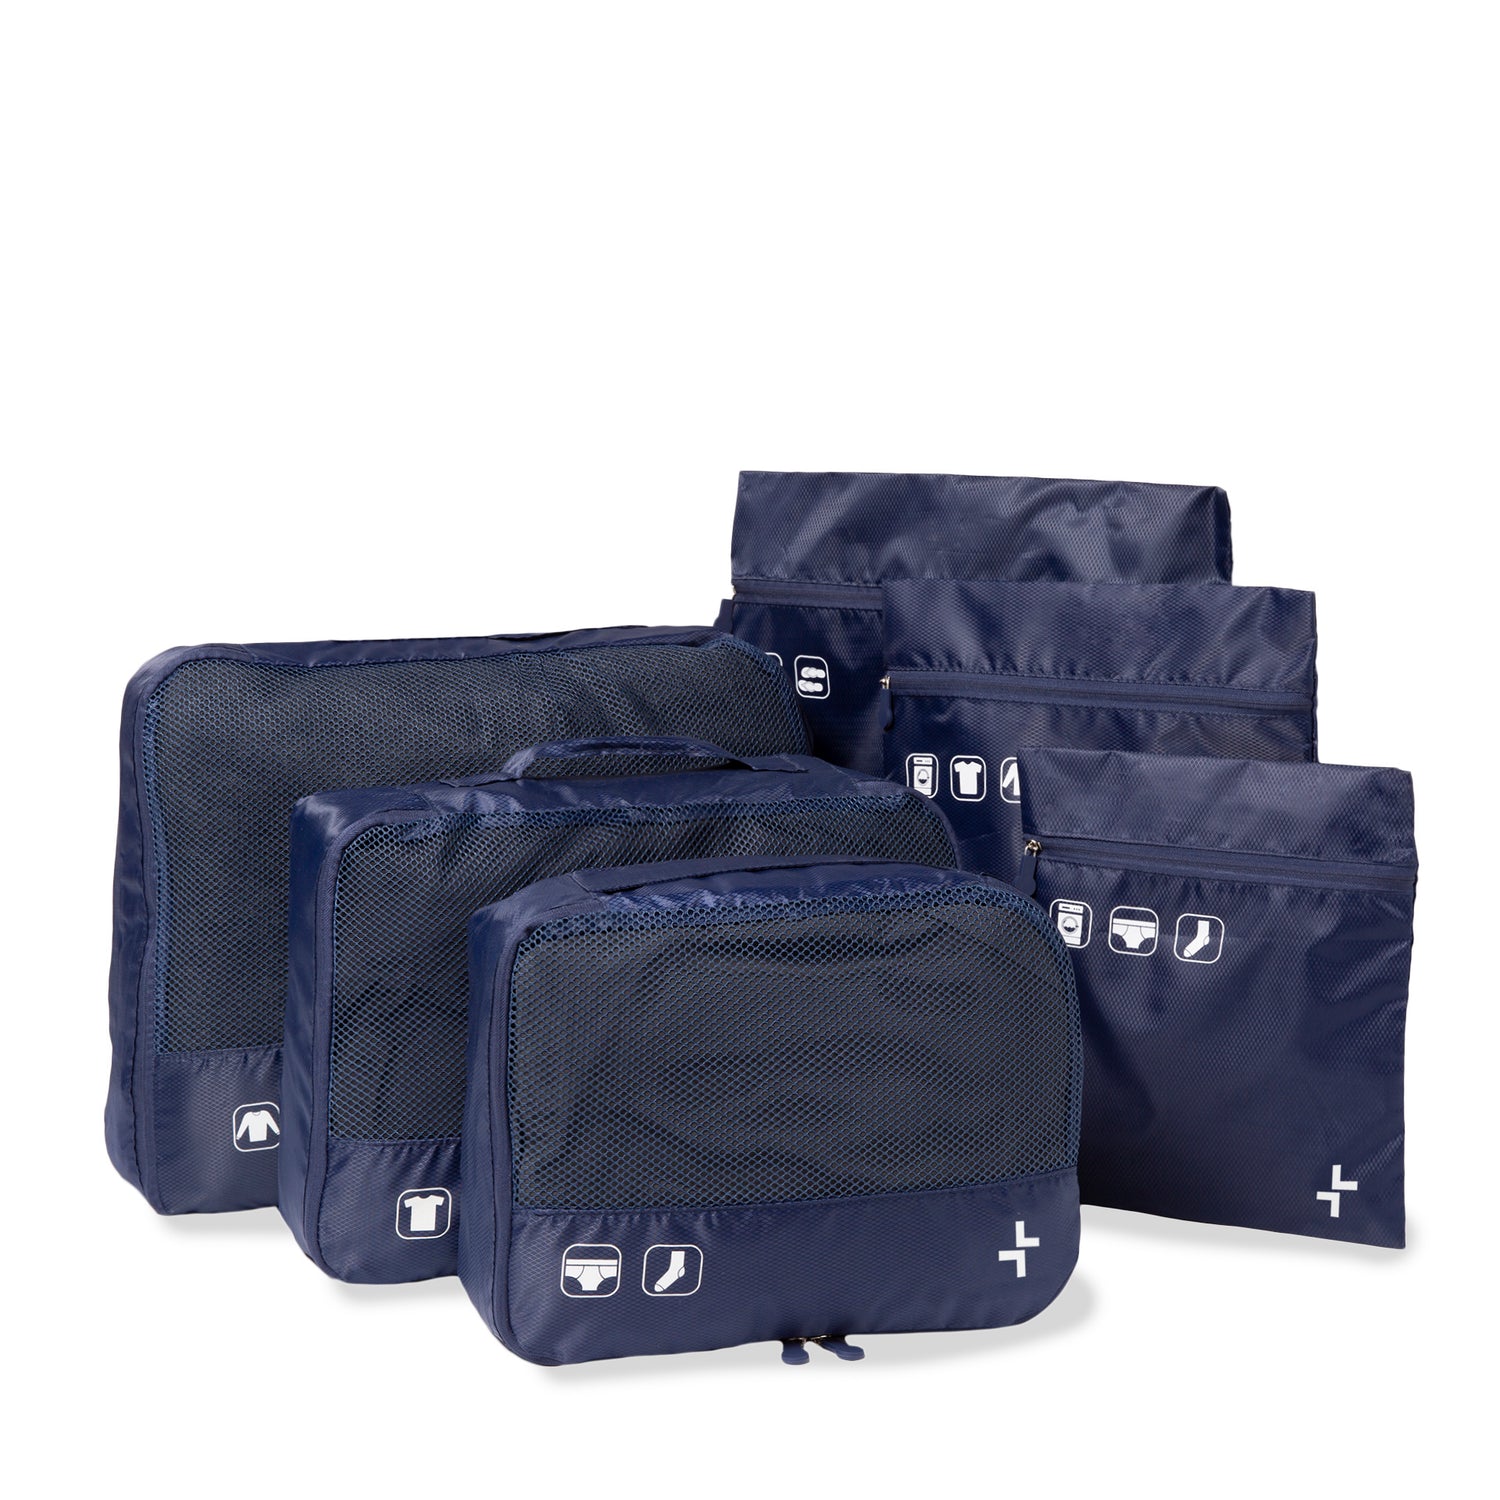 70D Ultralight Packing Cubes 7 Set, 3 Compression Packing Cubes 3 Packing  Organizers With 1 Shoe Bag